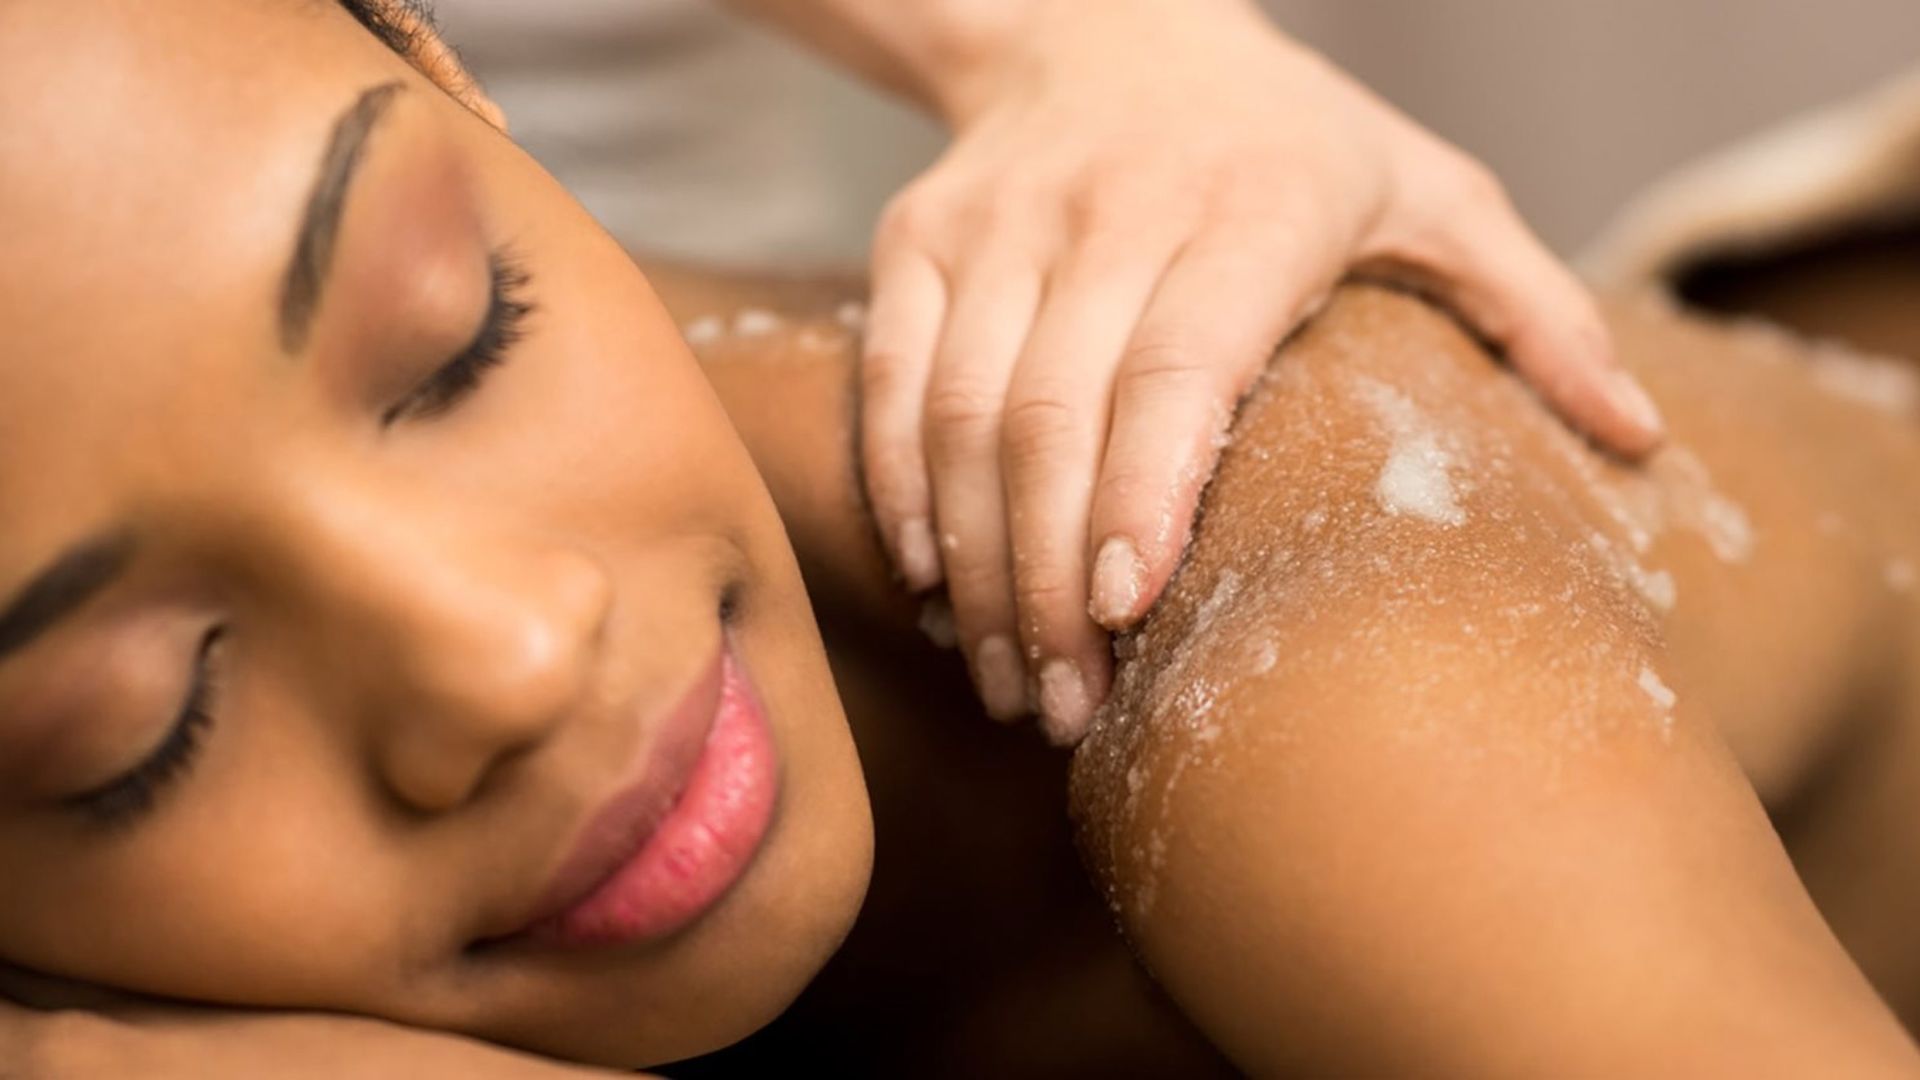 A close up of a woman getting a body treatment at a spa